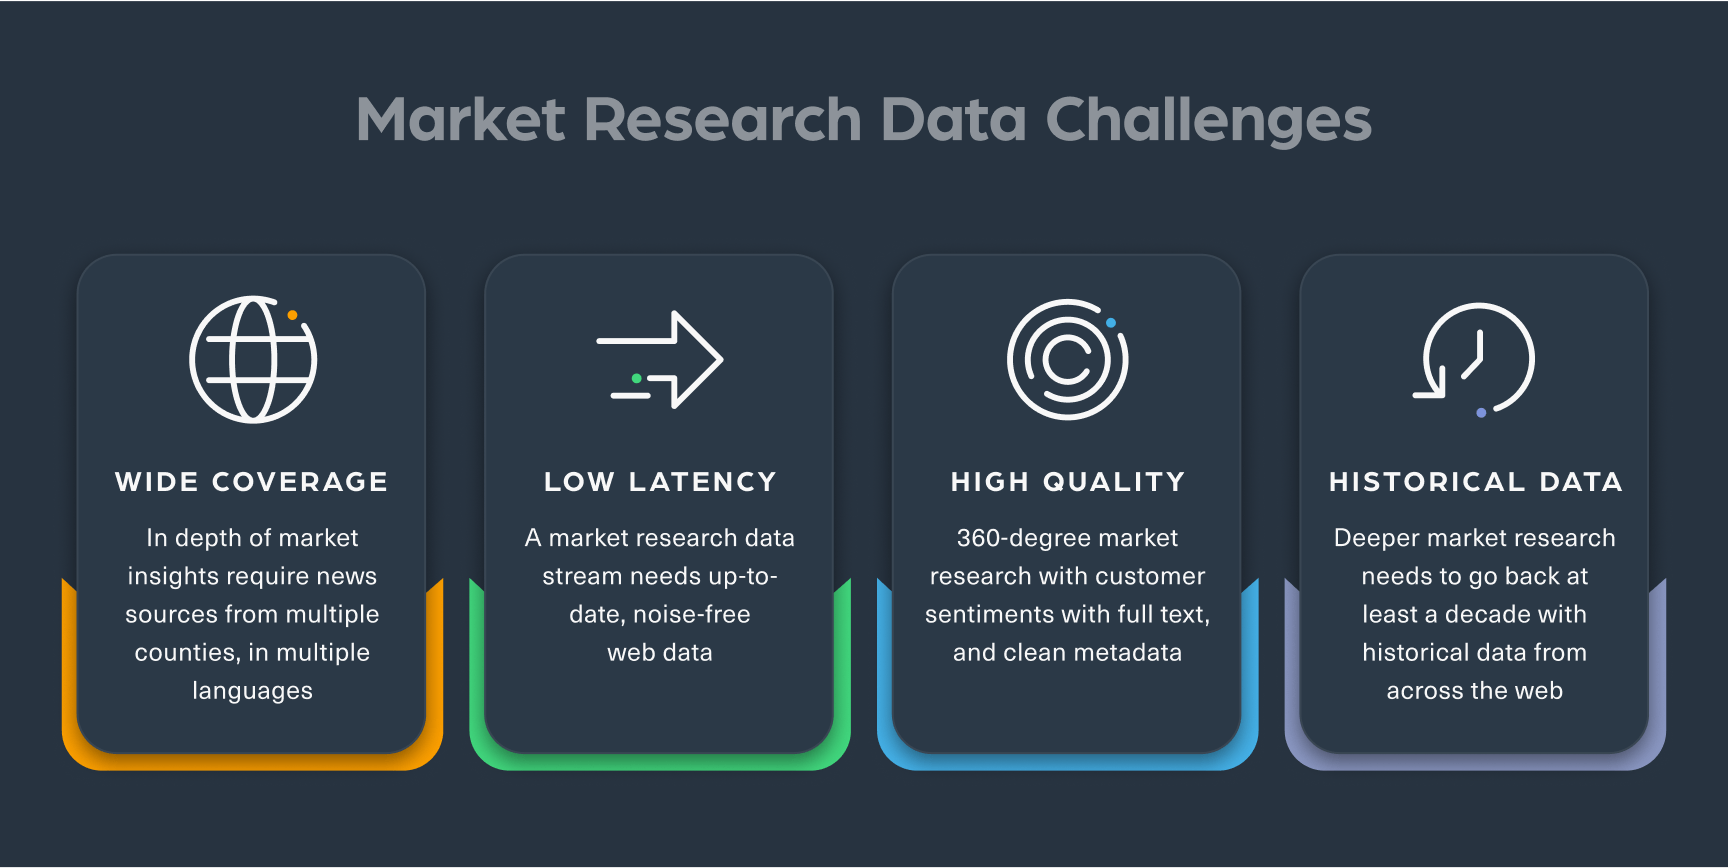 Market research data challenges